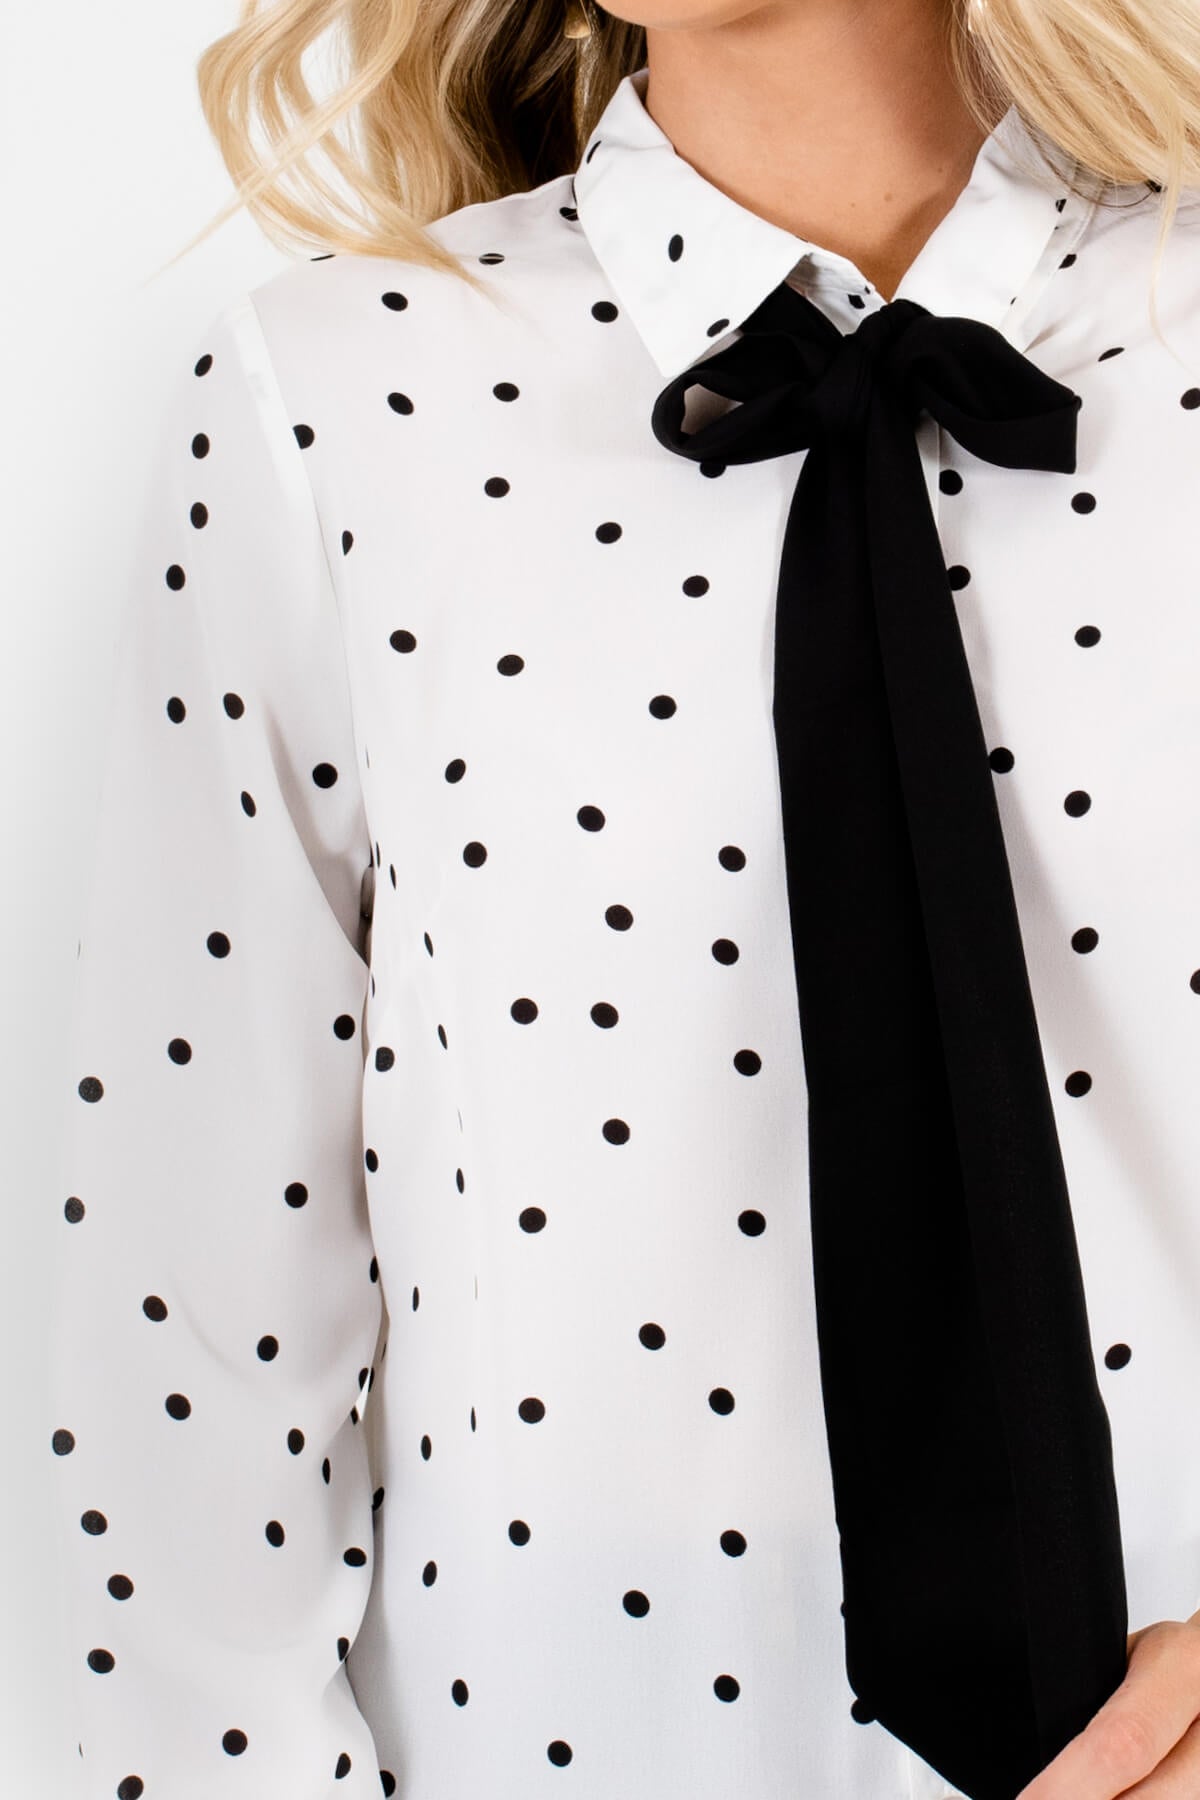 White Black Polka Dot Pussybow Shirts Affordable Online Boutique